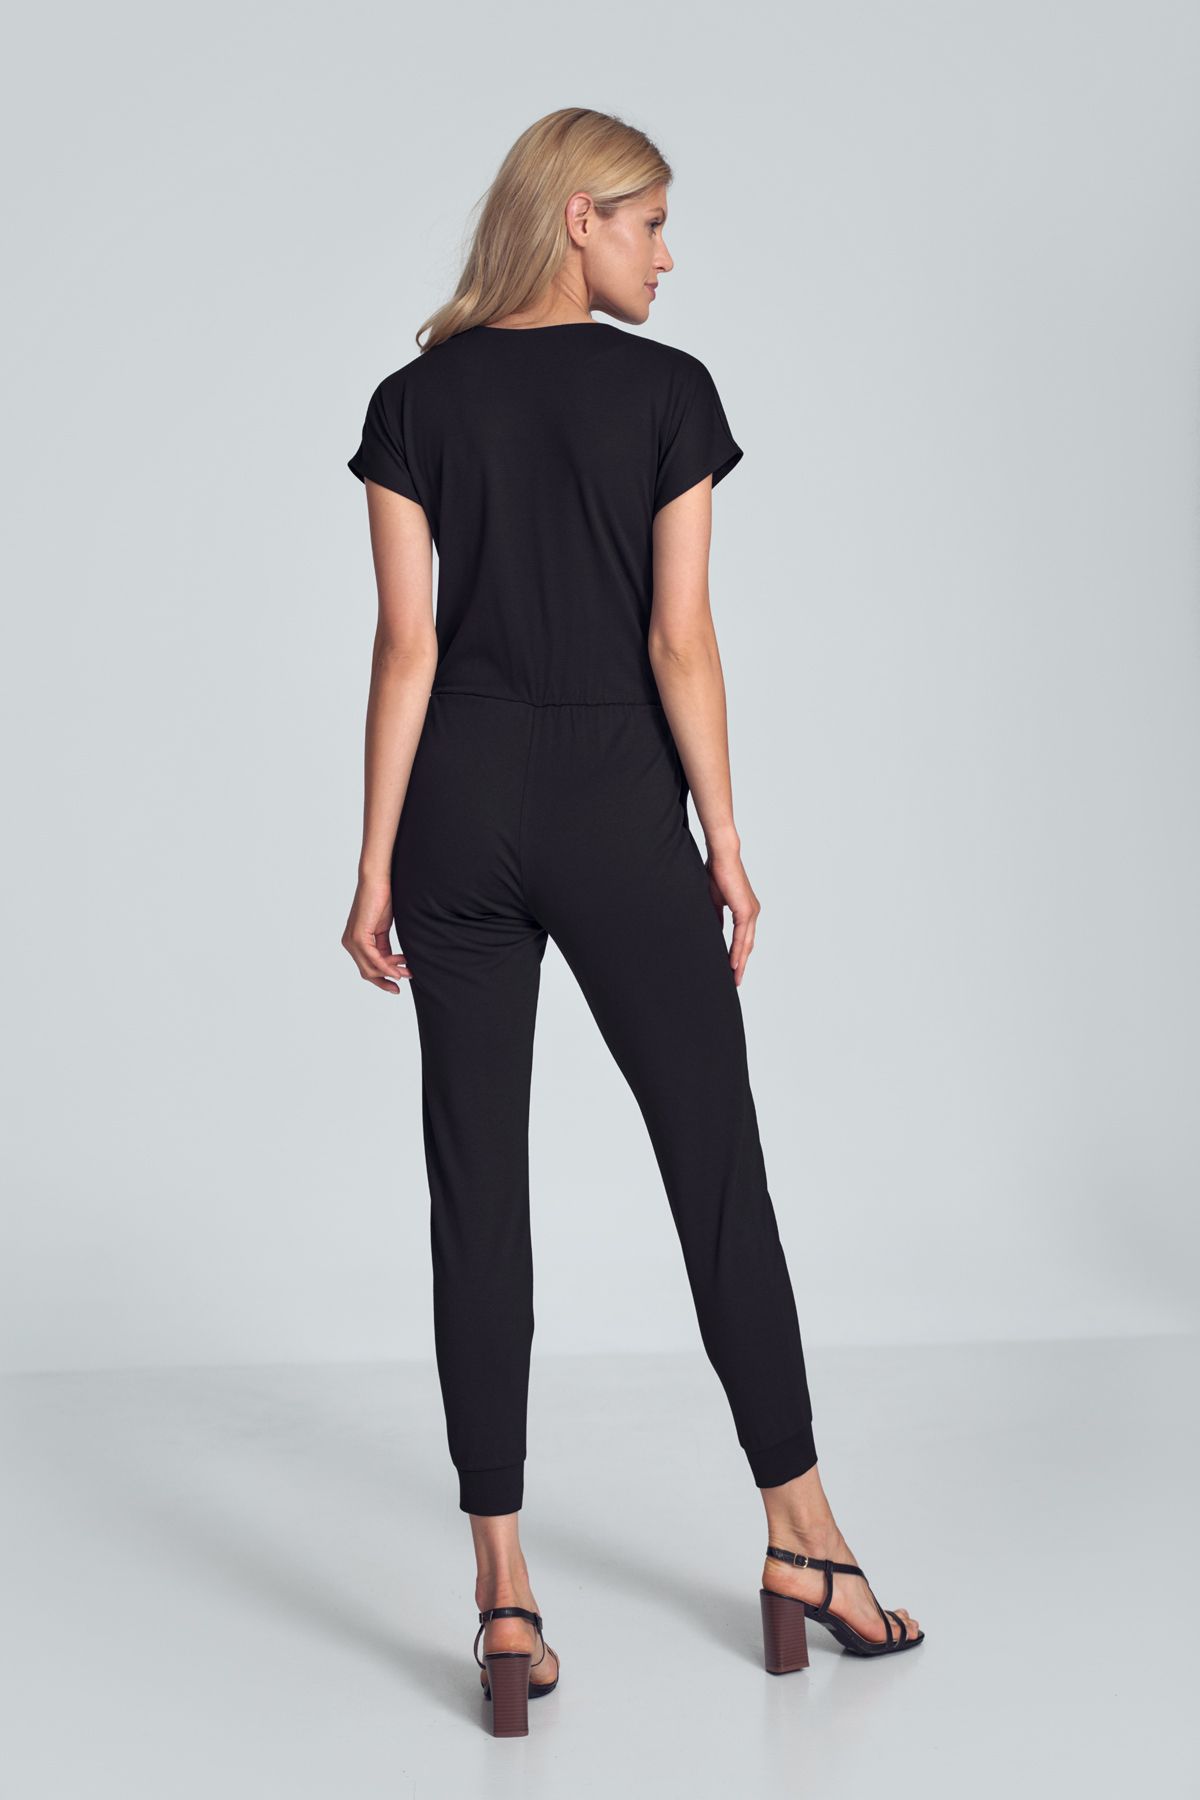 Black jumpsuit with a sporty cut, wrinkled neckline, an elastic band sewn at the waist, narrow legs finished with a welt. Pockets in the side seams.